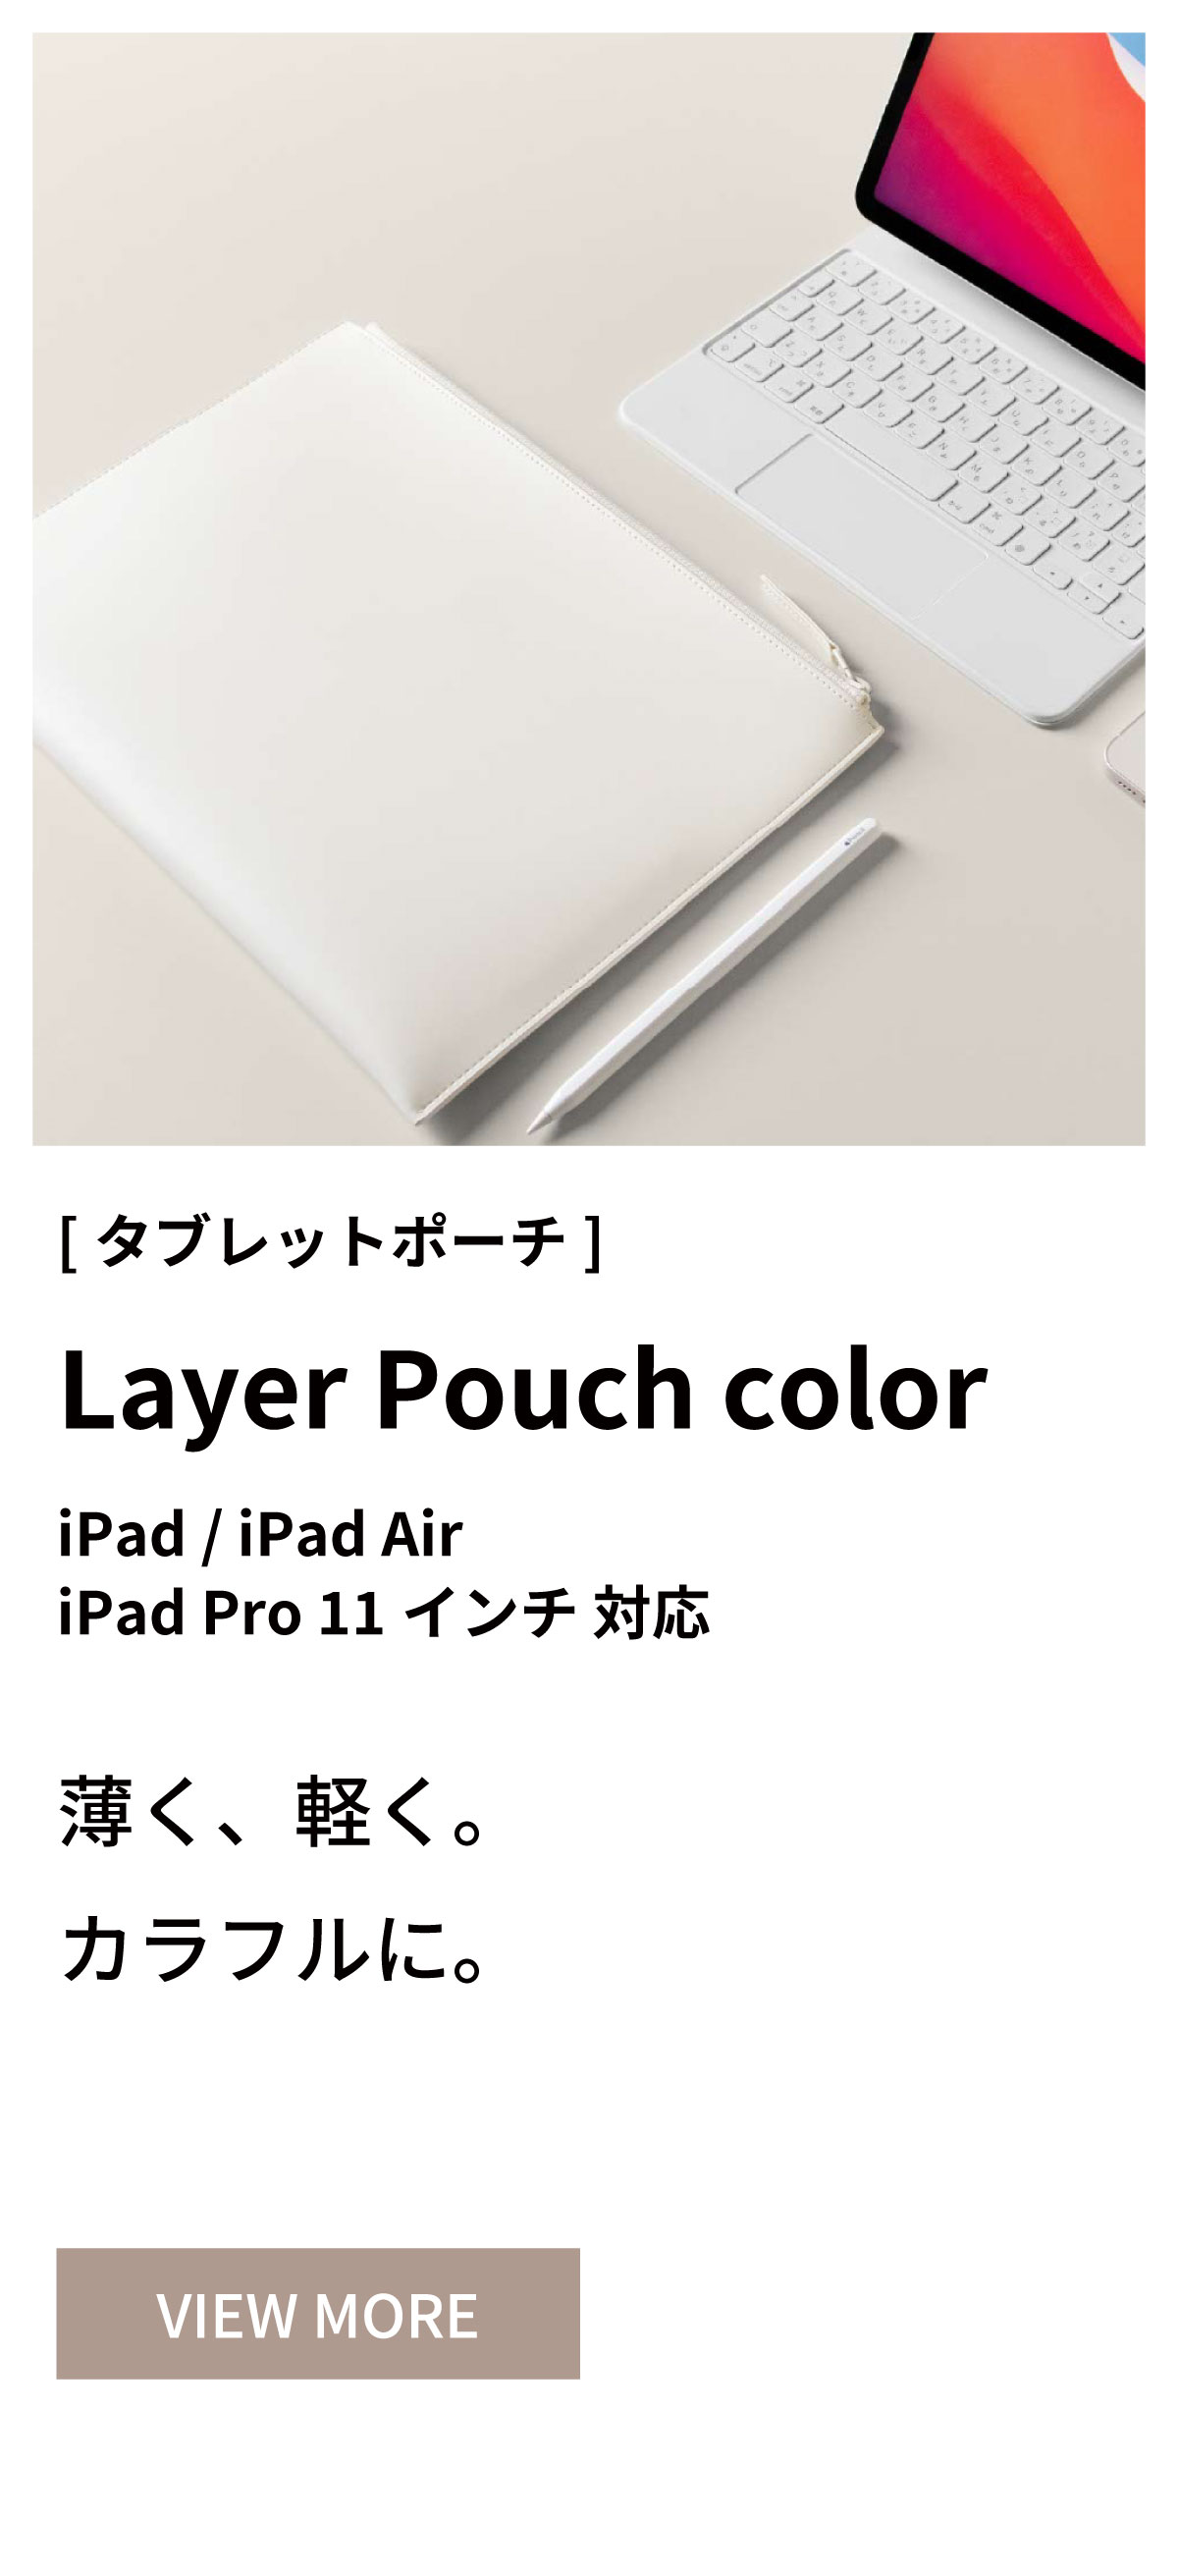 Layeer Pouch color